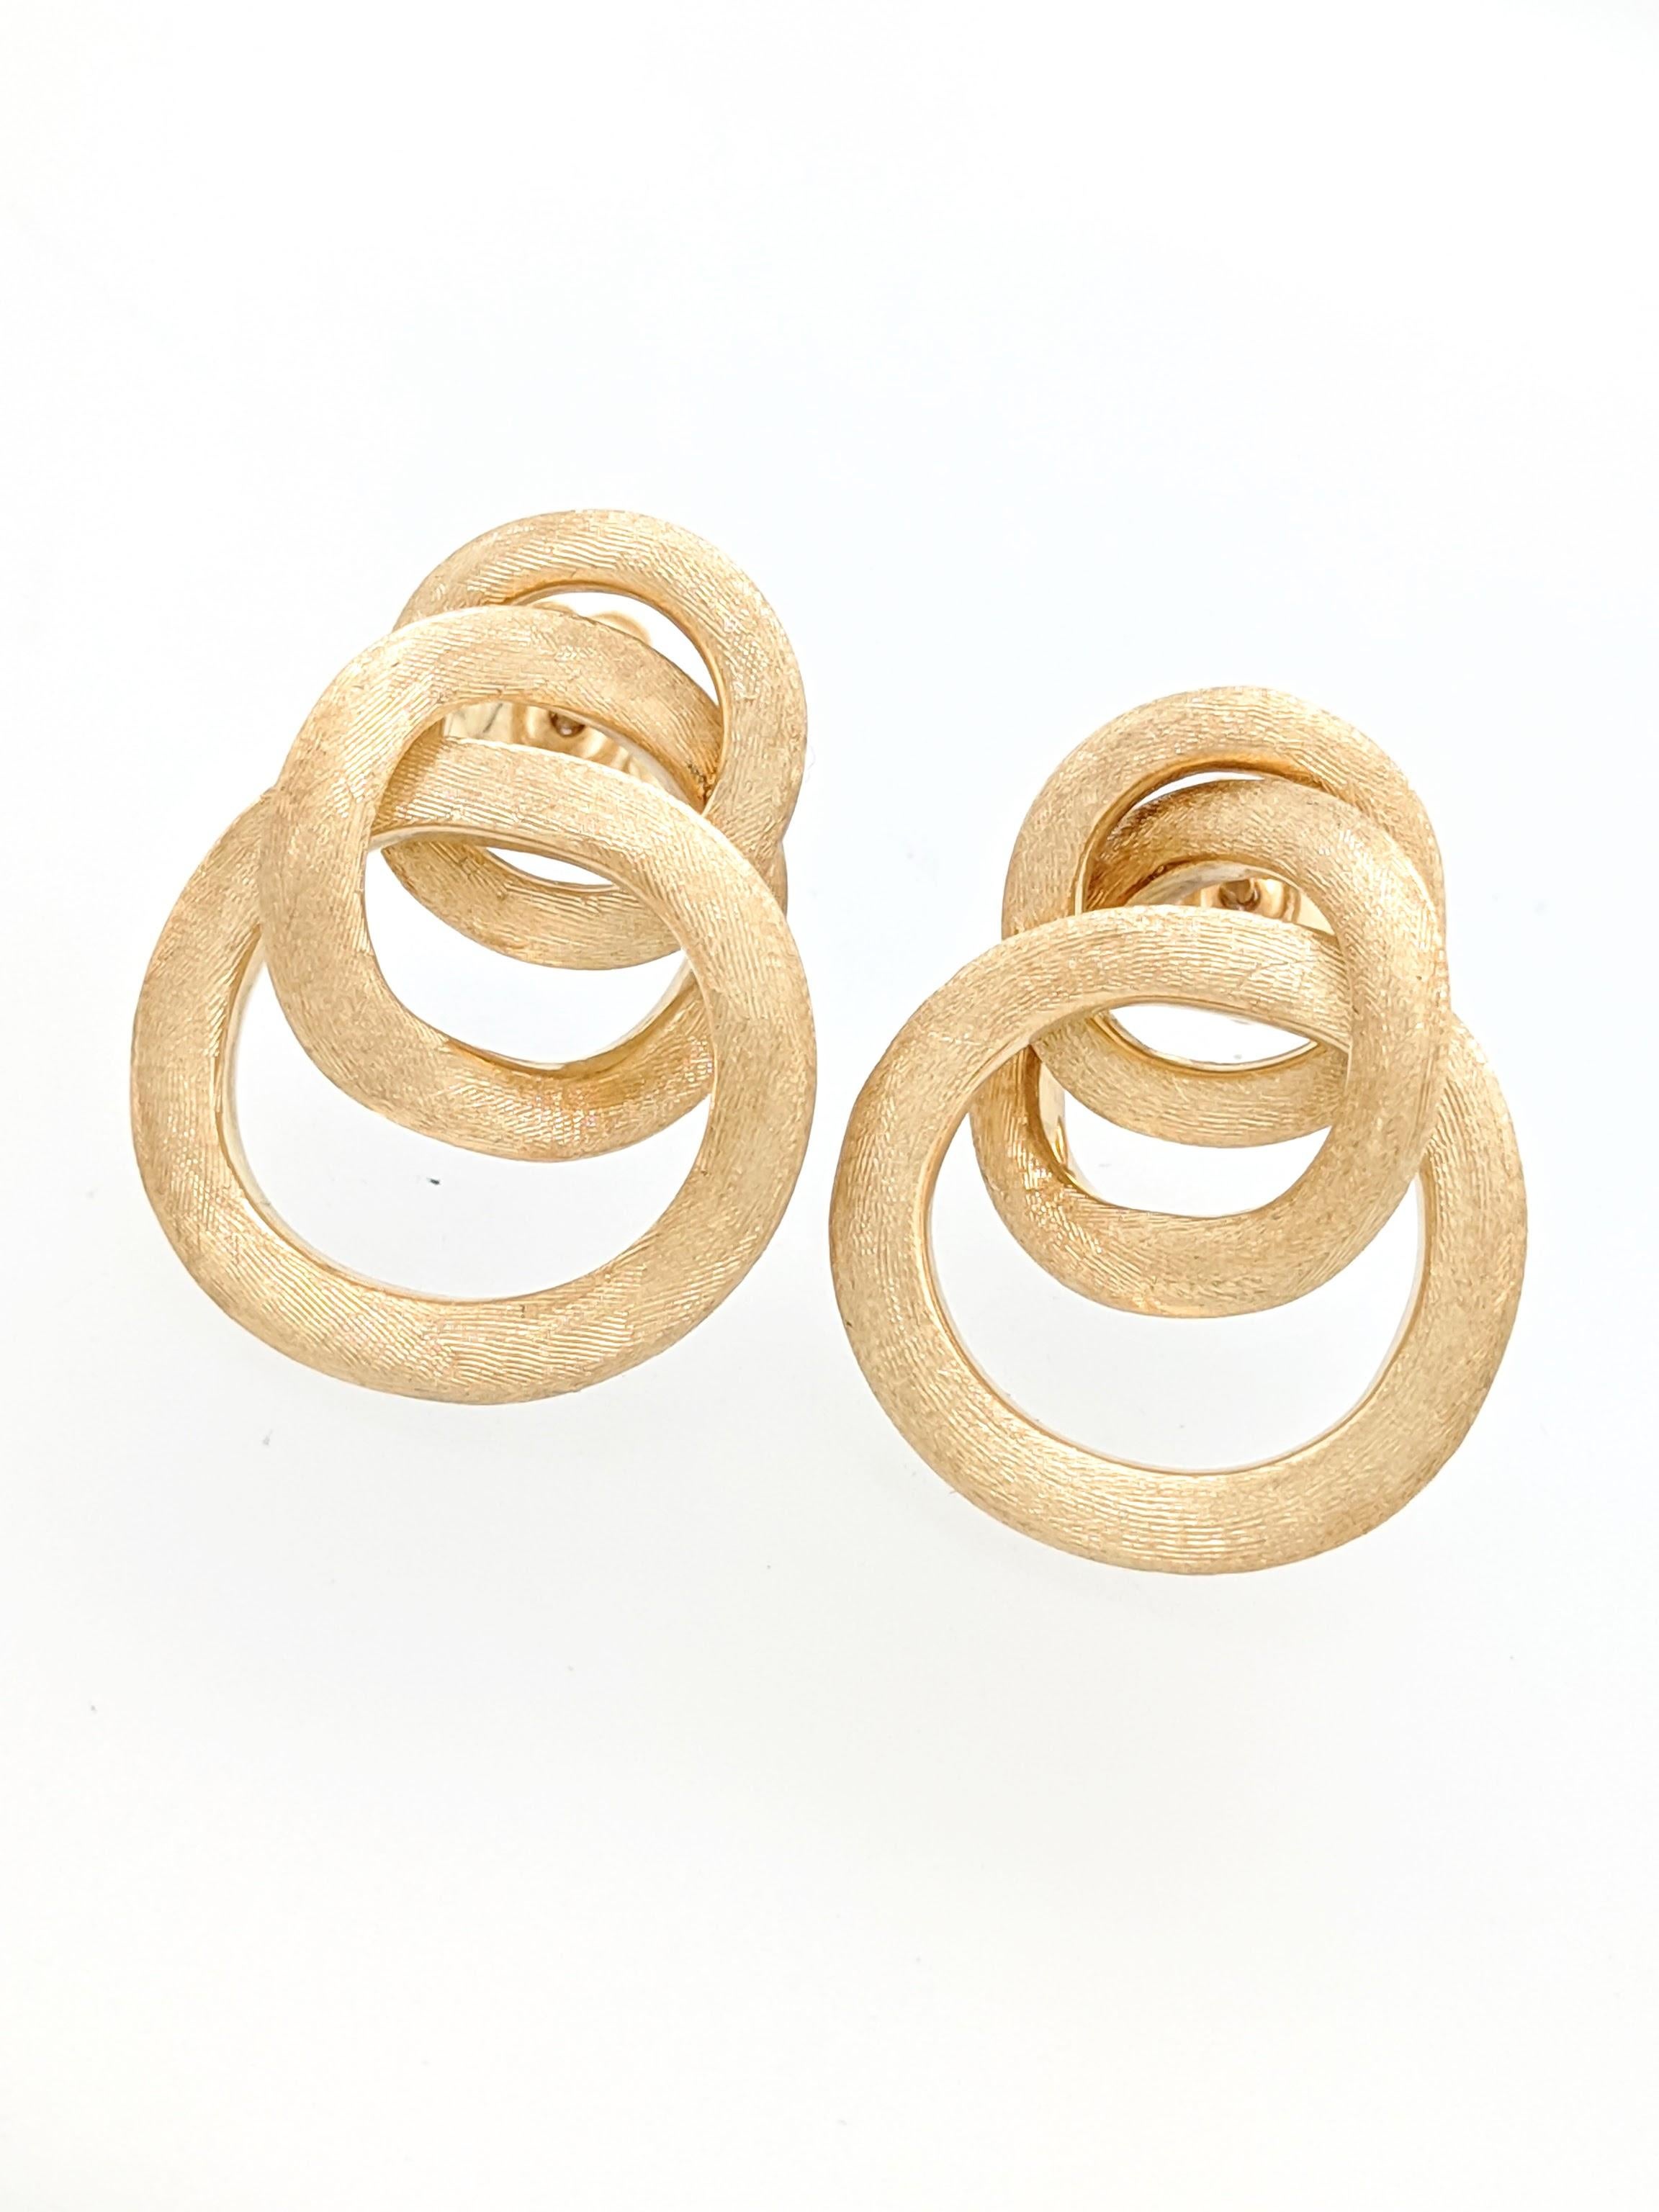 Marco Bicego 18K Yellow Gold Link Small Knot Earrings Jaipur Collection

You are viewing a Beautiful Pair of Marco Bicego Link Small Knot Earrings from the Jaipur Collection. This is truly a stunning pair of earrings any woman would love to add to